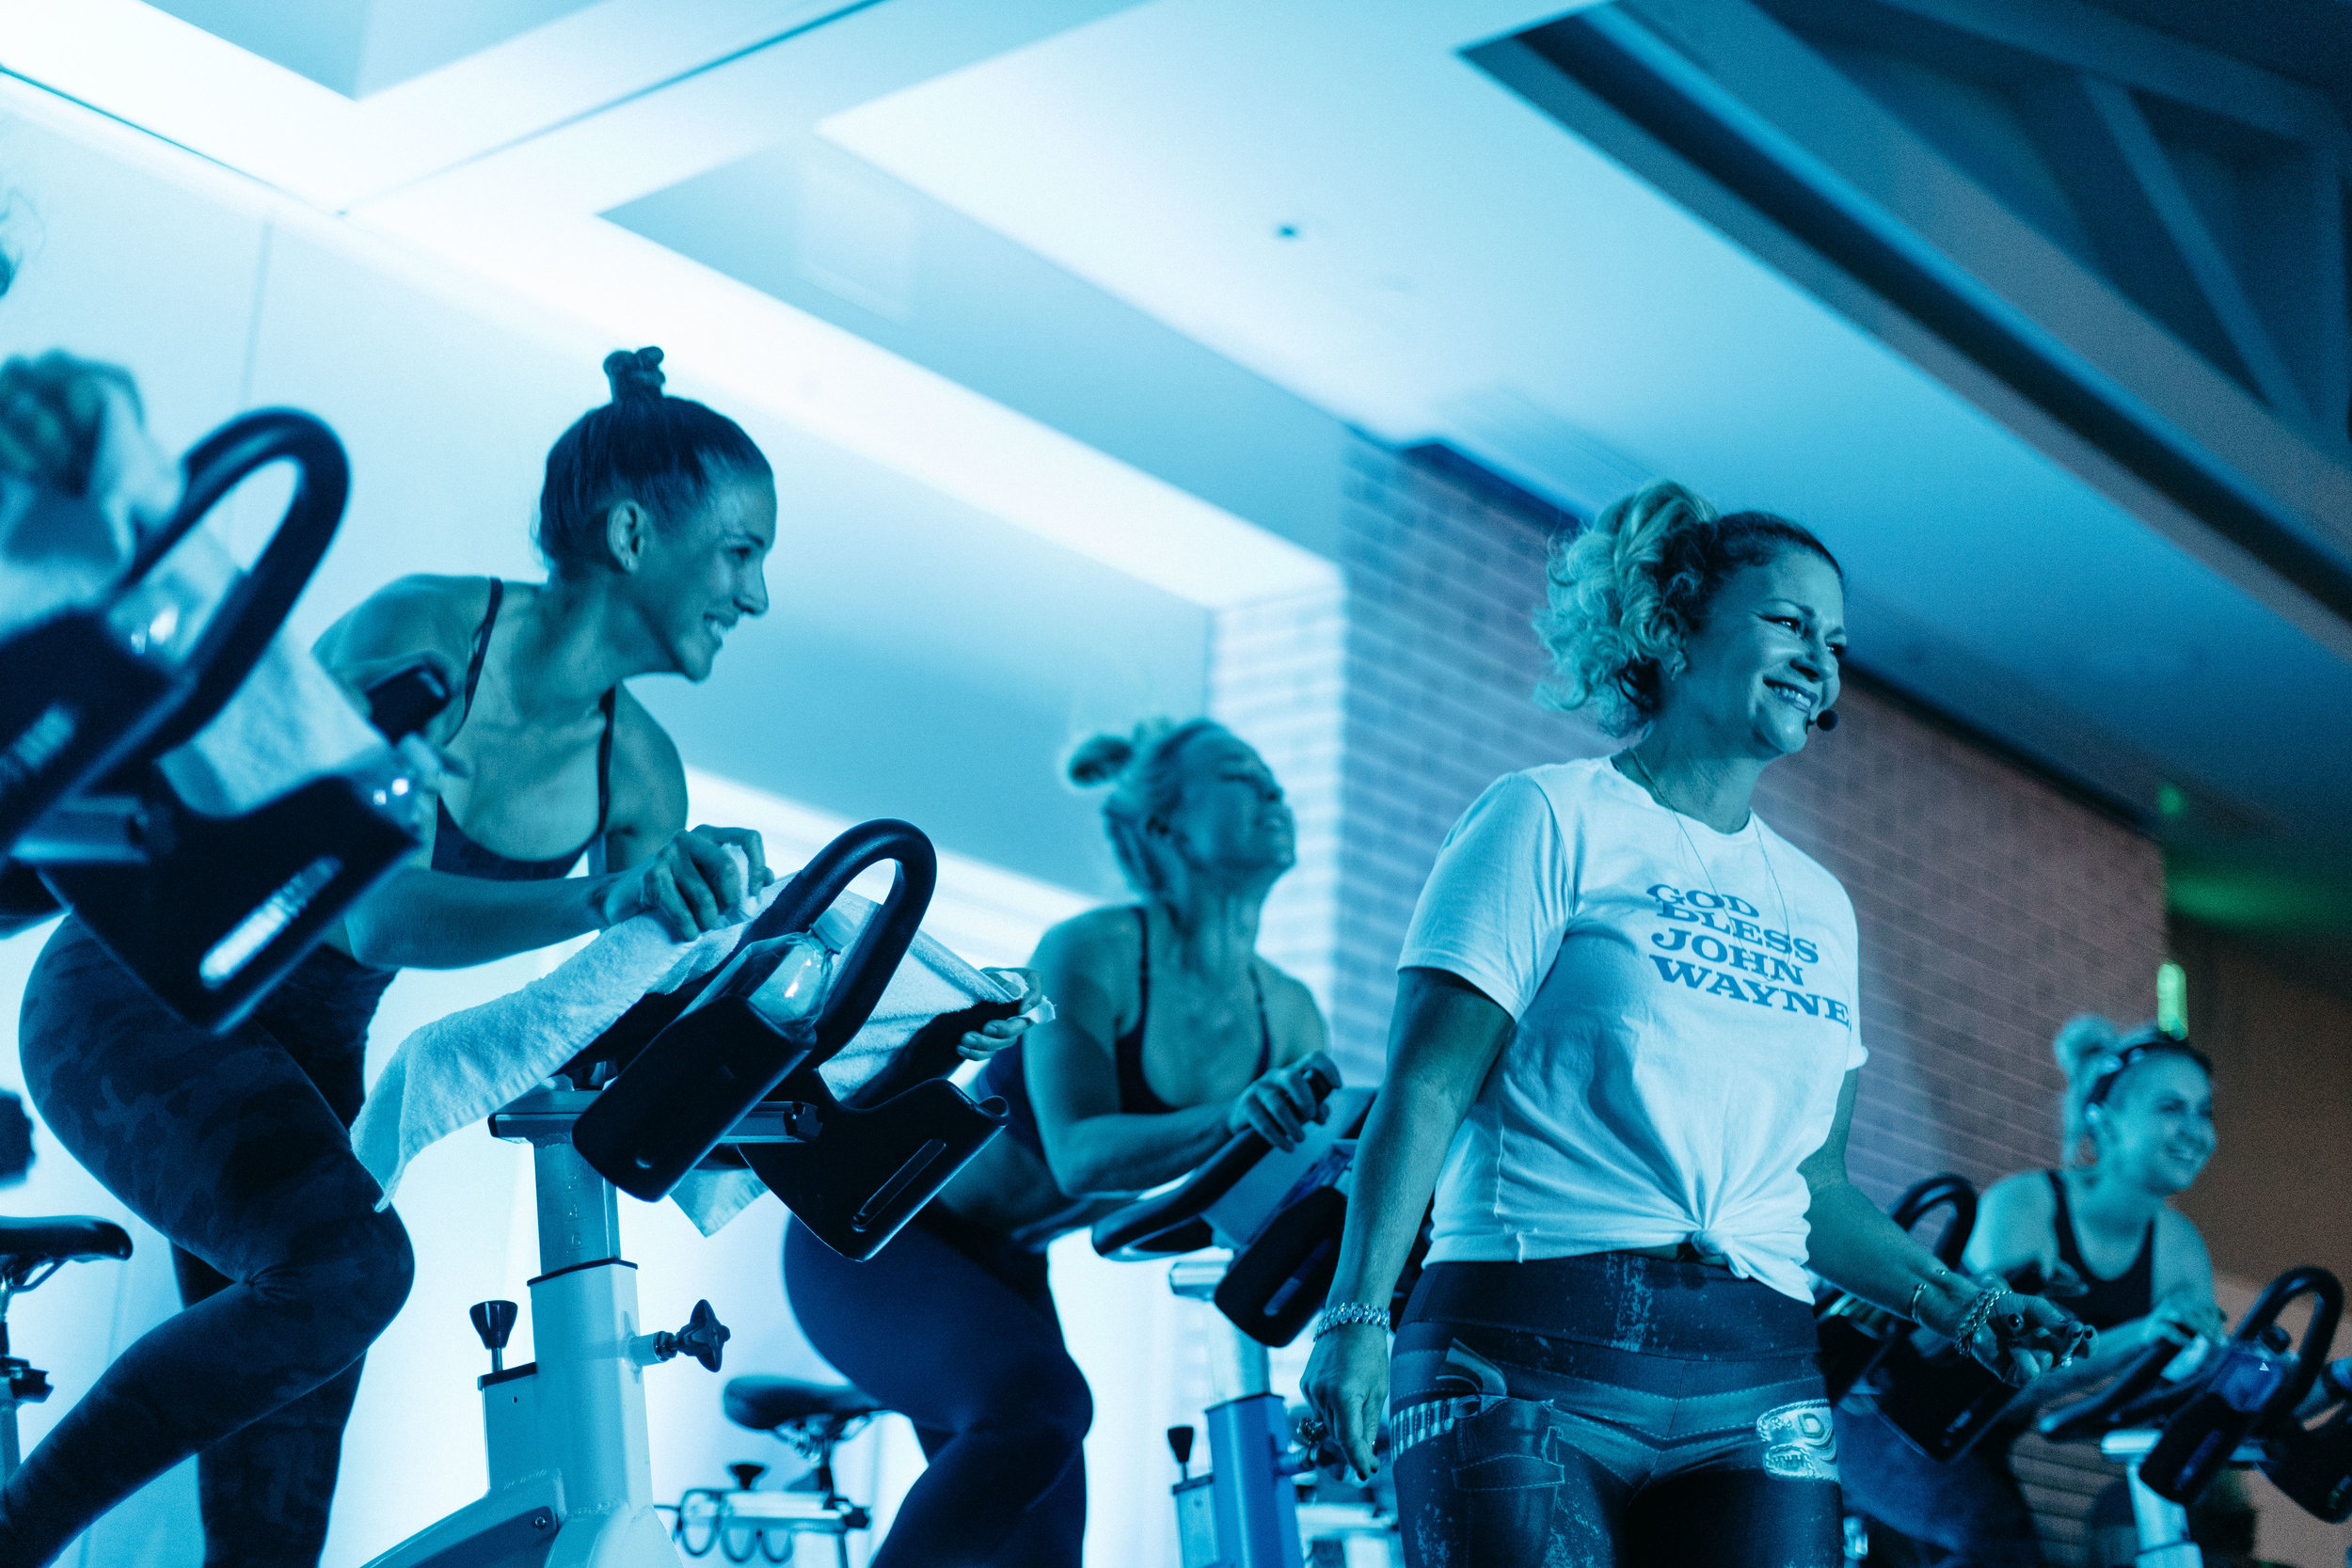 Energetic choreography and enthusiasm from the GritCycle instructors kept riders in motion during a three-hour cycle class to raise funds for the John Wayne Cancer Foundation.